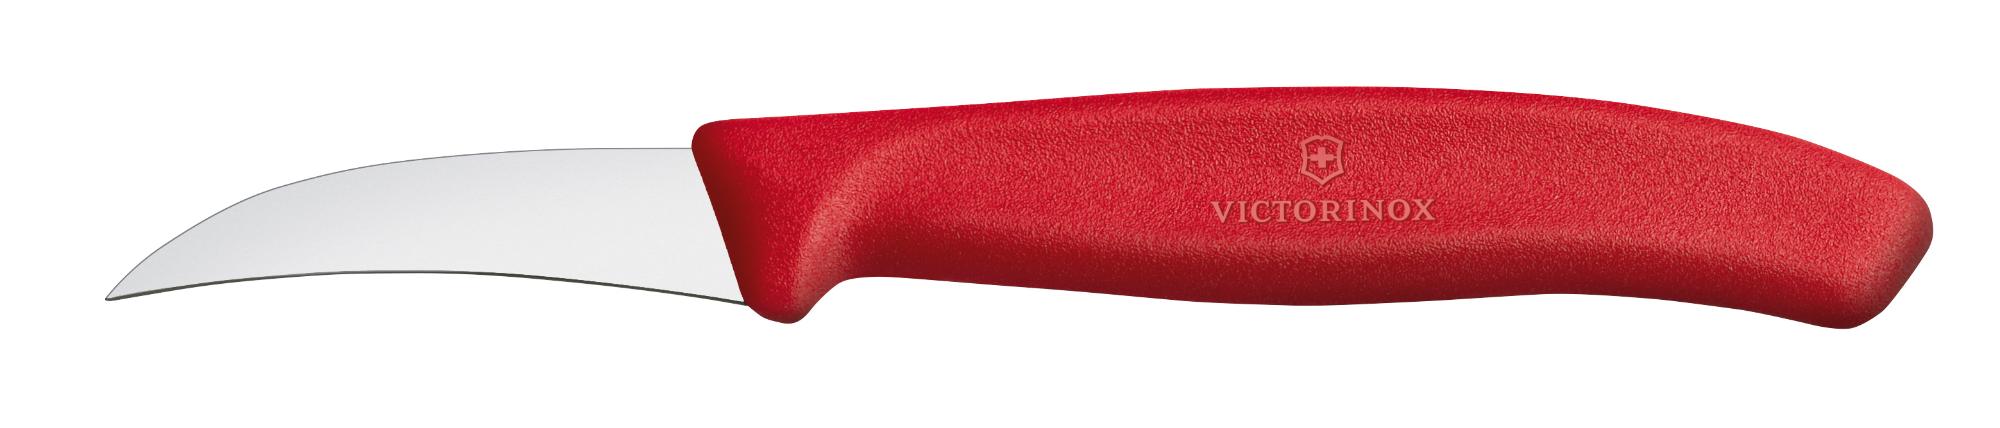 Swiss Classic vegetable knife, curved, 60 mm - red